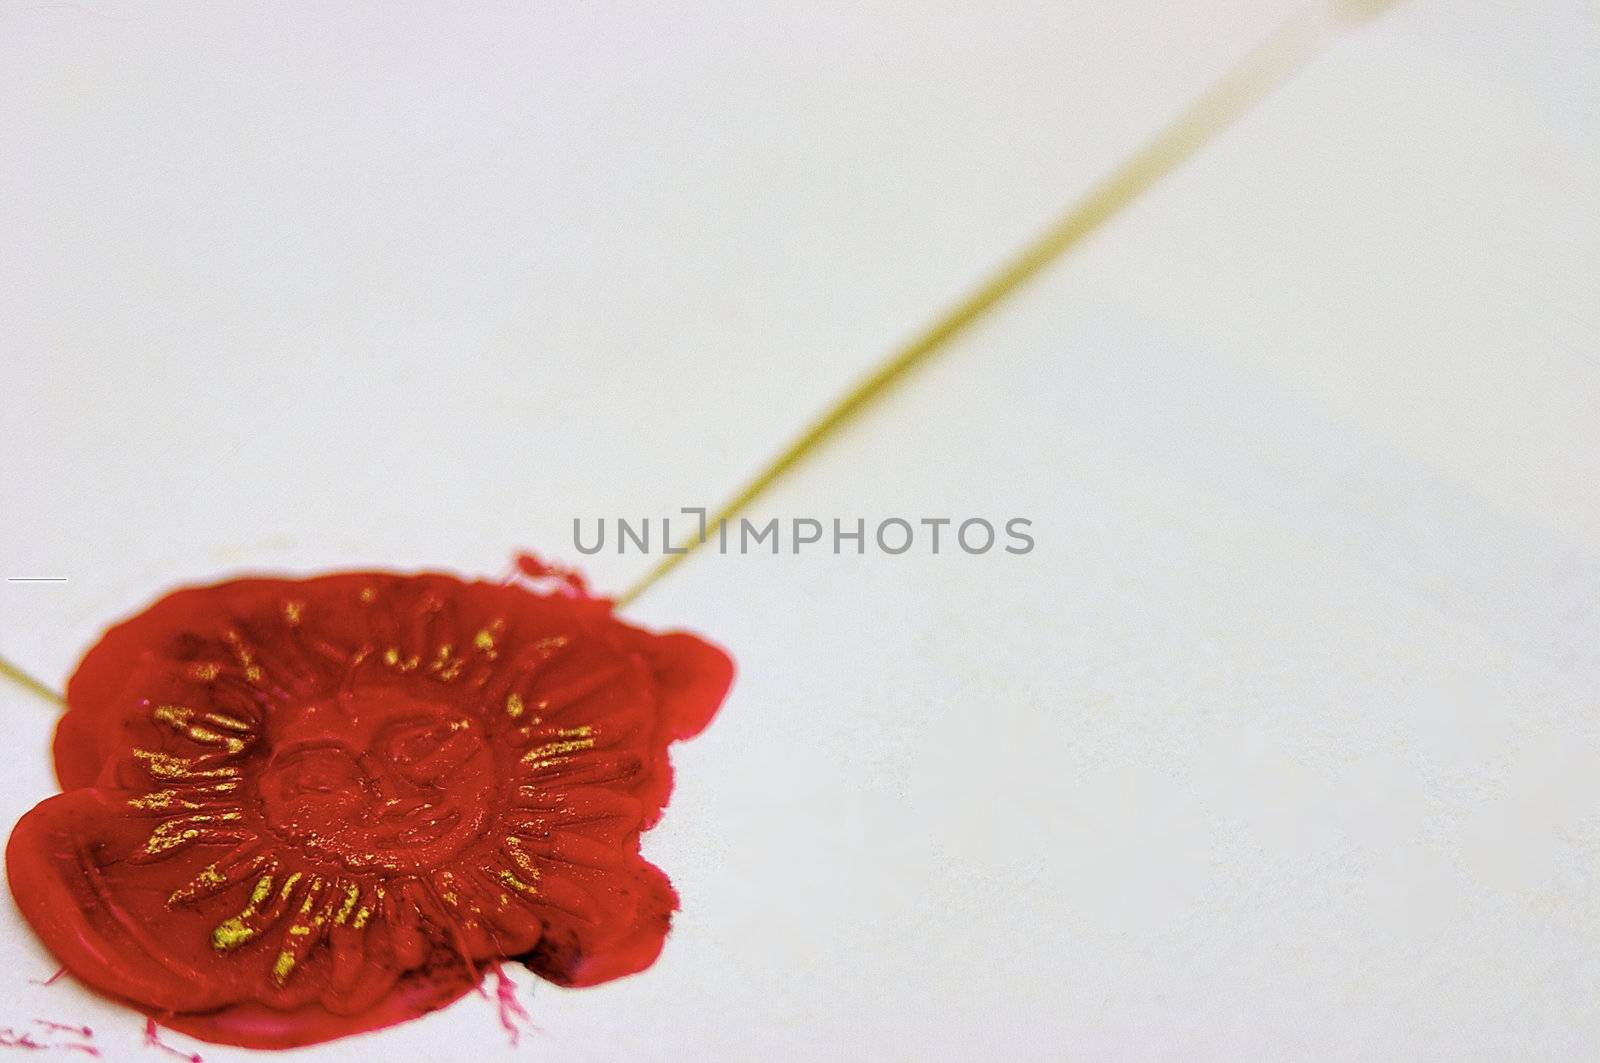 Signet stamped in red wax and gold ink to seal a parchment envelope